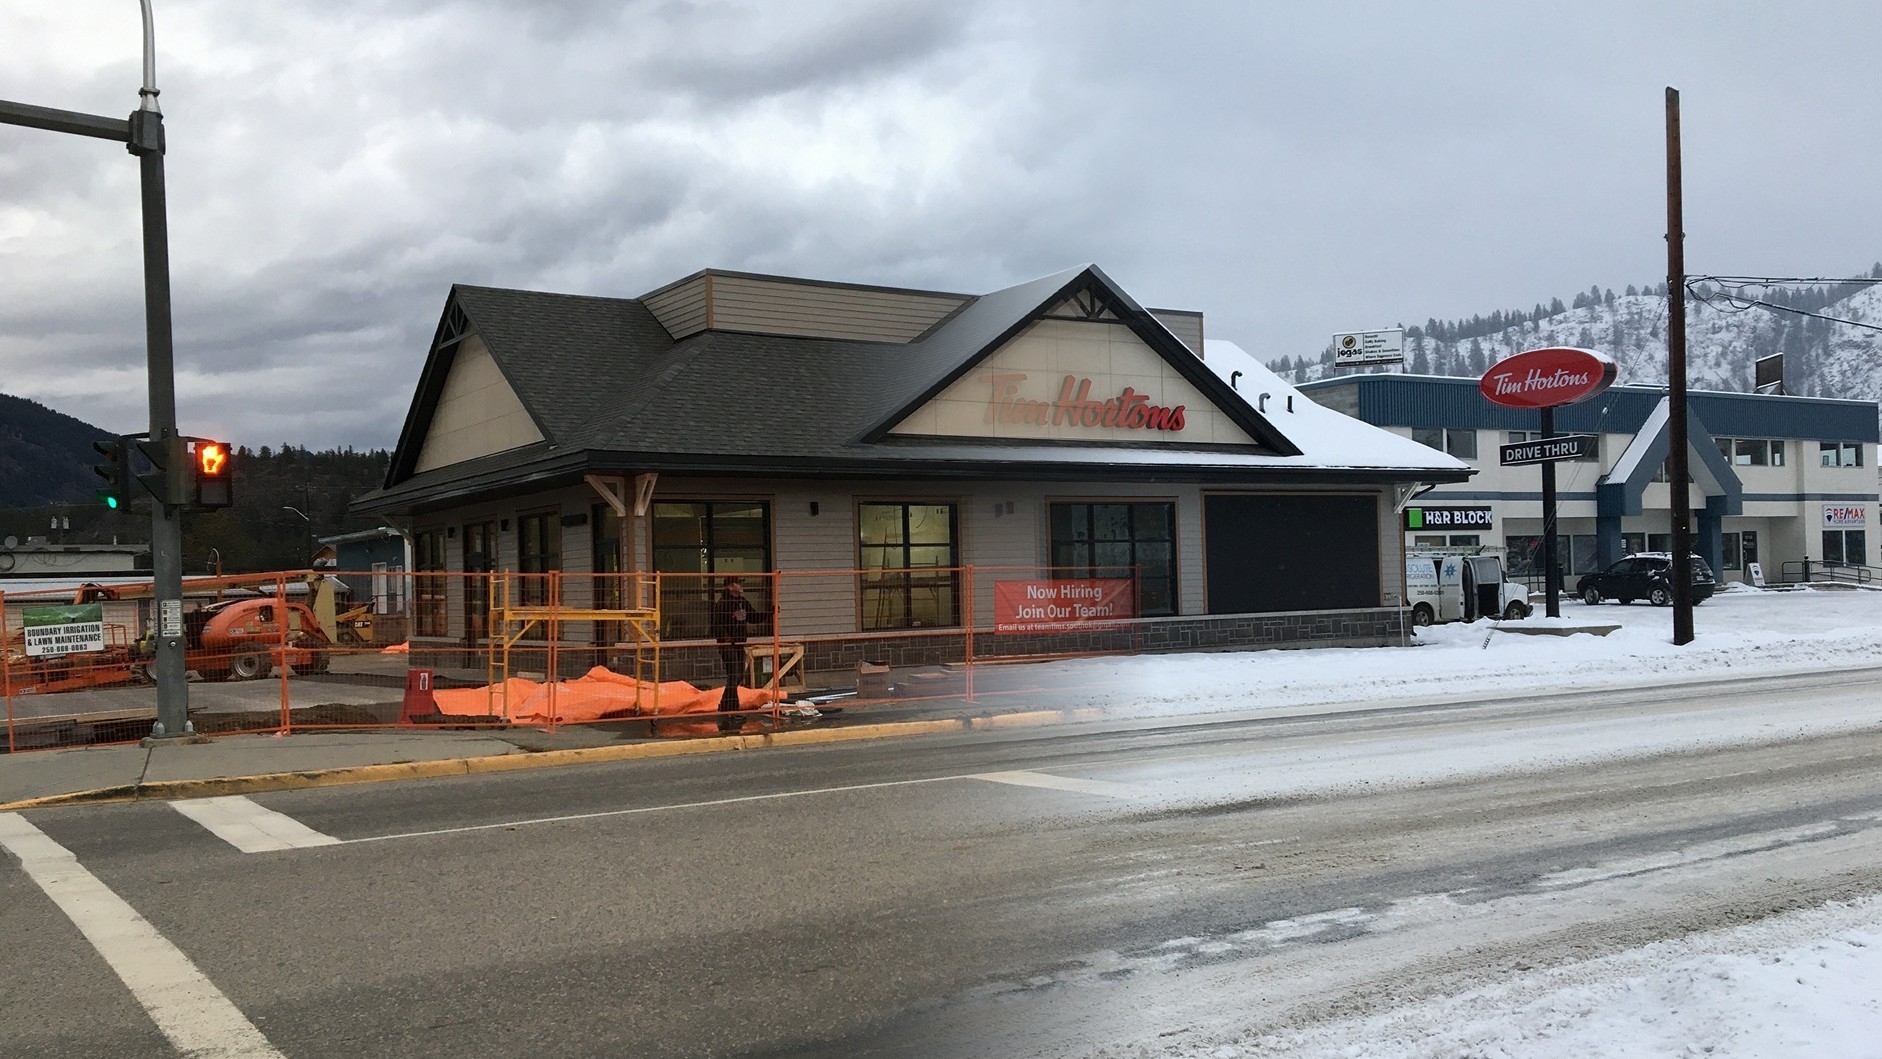 Franchise owners look to build Tim Horton's in Grand Forks - Grand